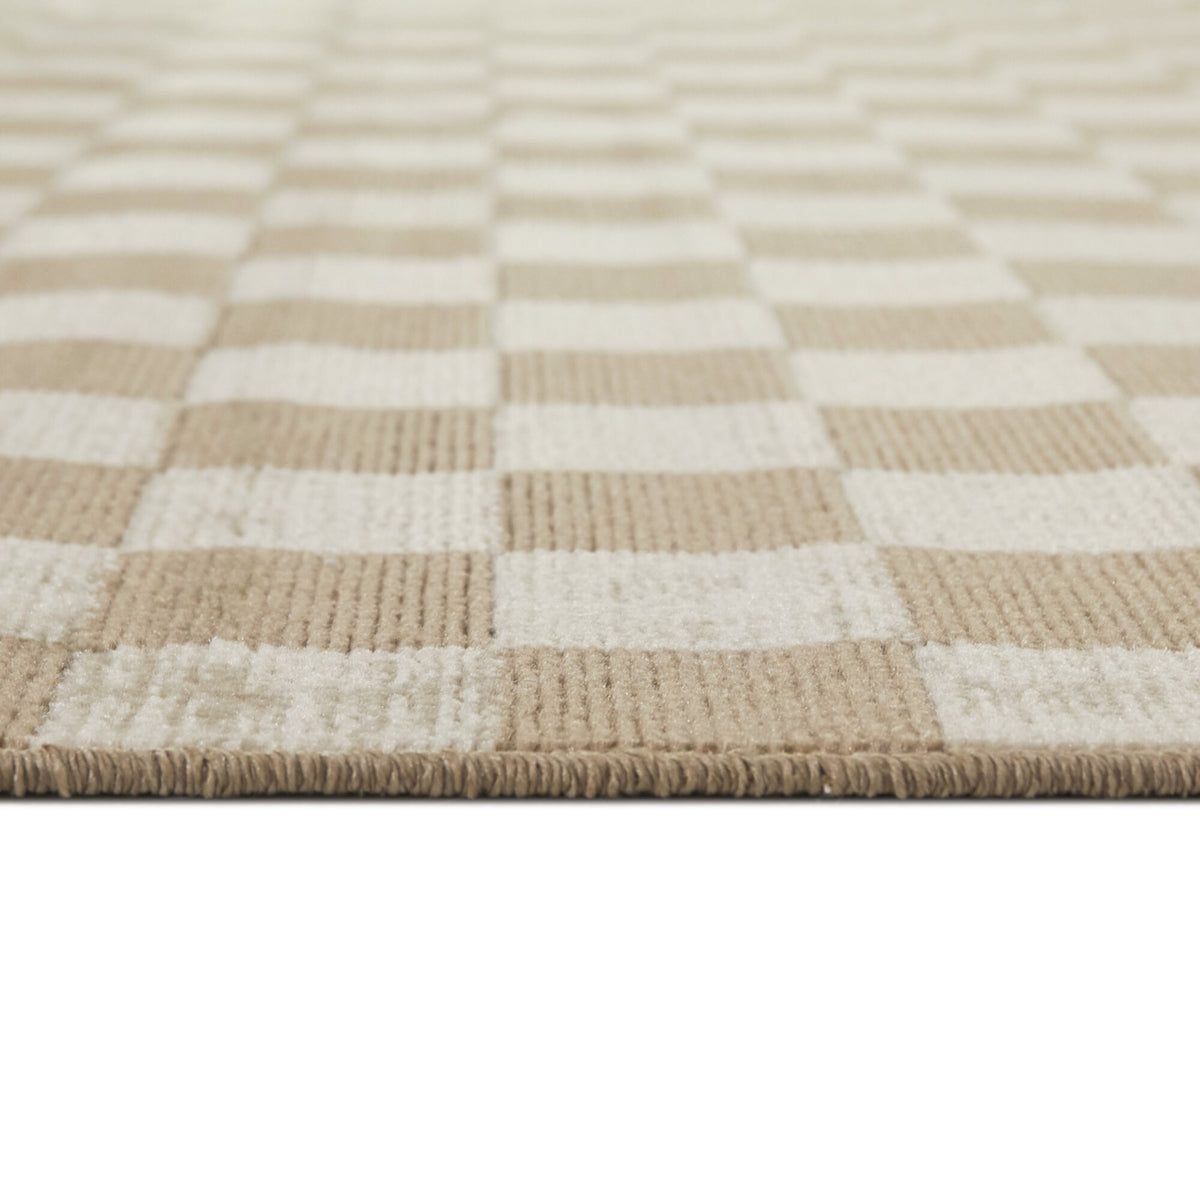 Adelaide Recycled Checkered Area Rug